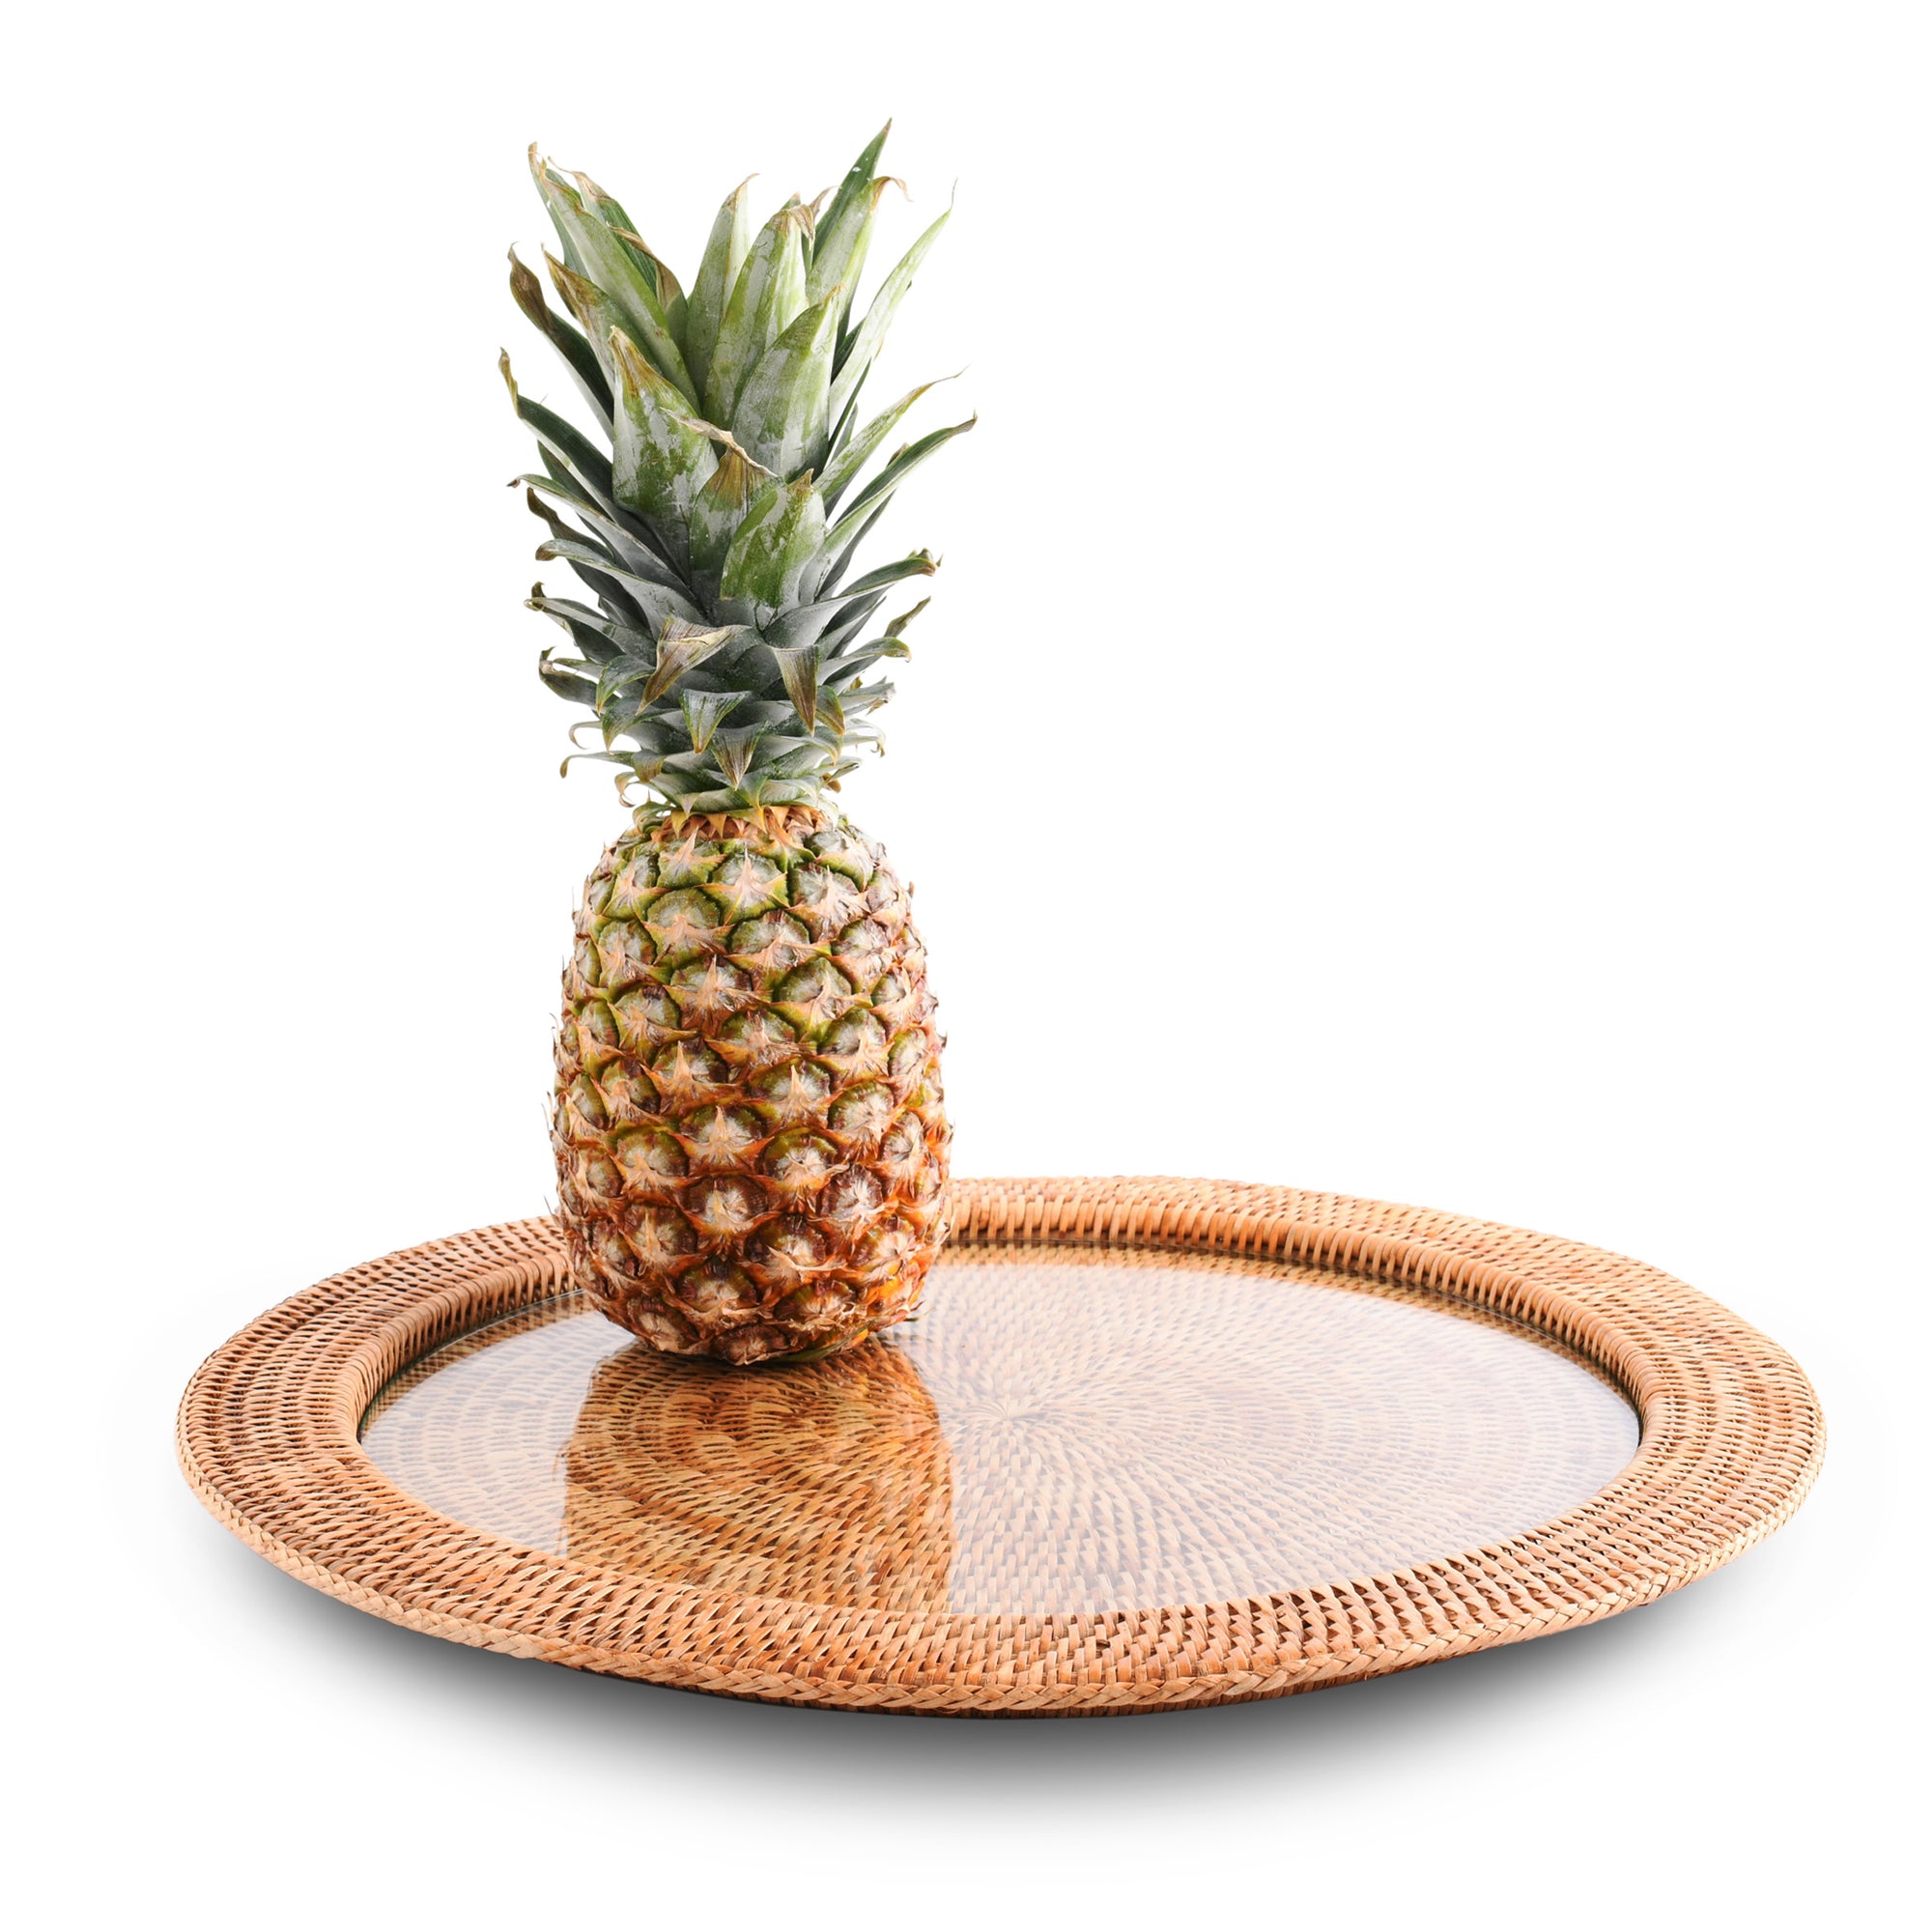 Vagabond House Round Serving Tray Hand Woven Wicker Rattan - Glass Insert Product Image